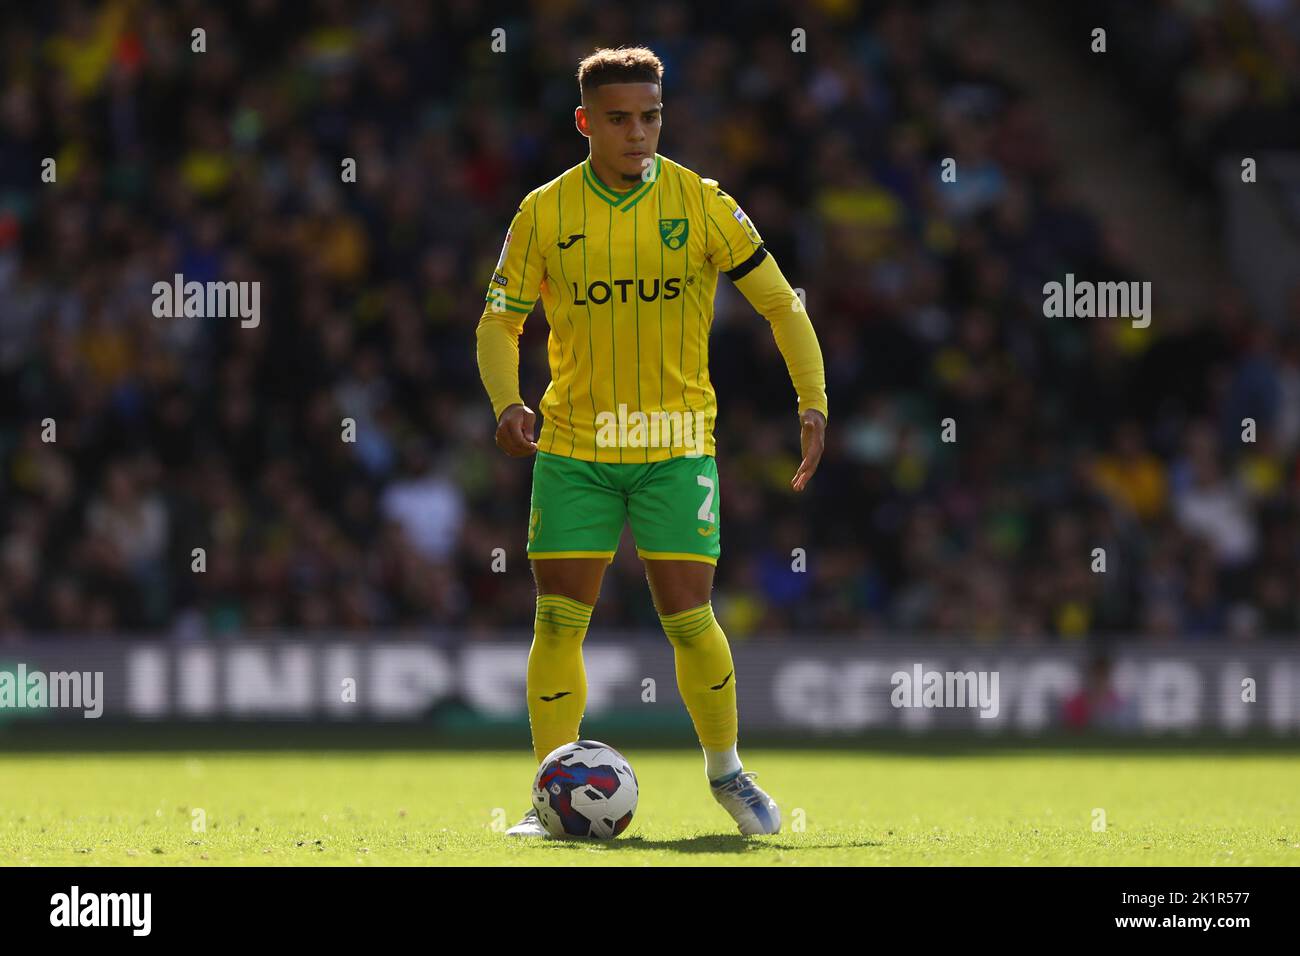 Max Aarons of Norwich City - Norwich City v West Bromwich Albion, Sky Bet Championship, Carrow Road, Norwich, UK - 17th September 2022  Editorial Use Only - DataCo restrictions apply Stock Photo